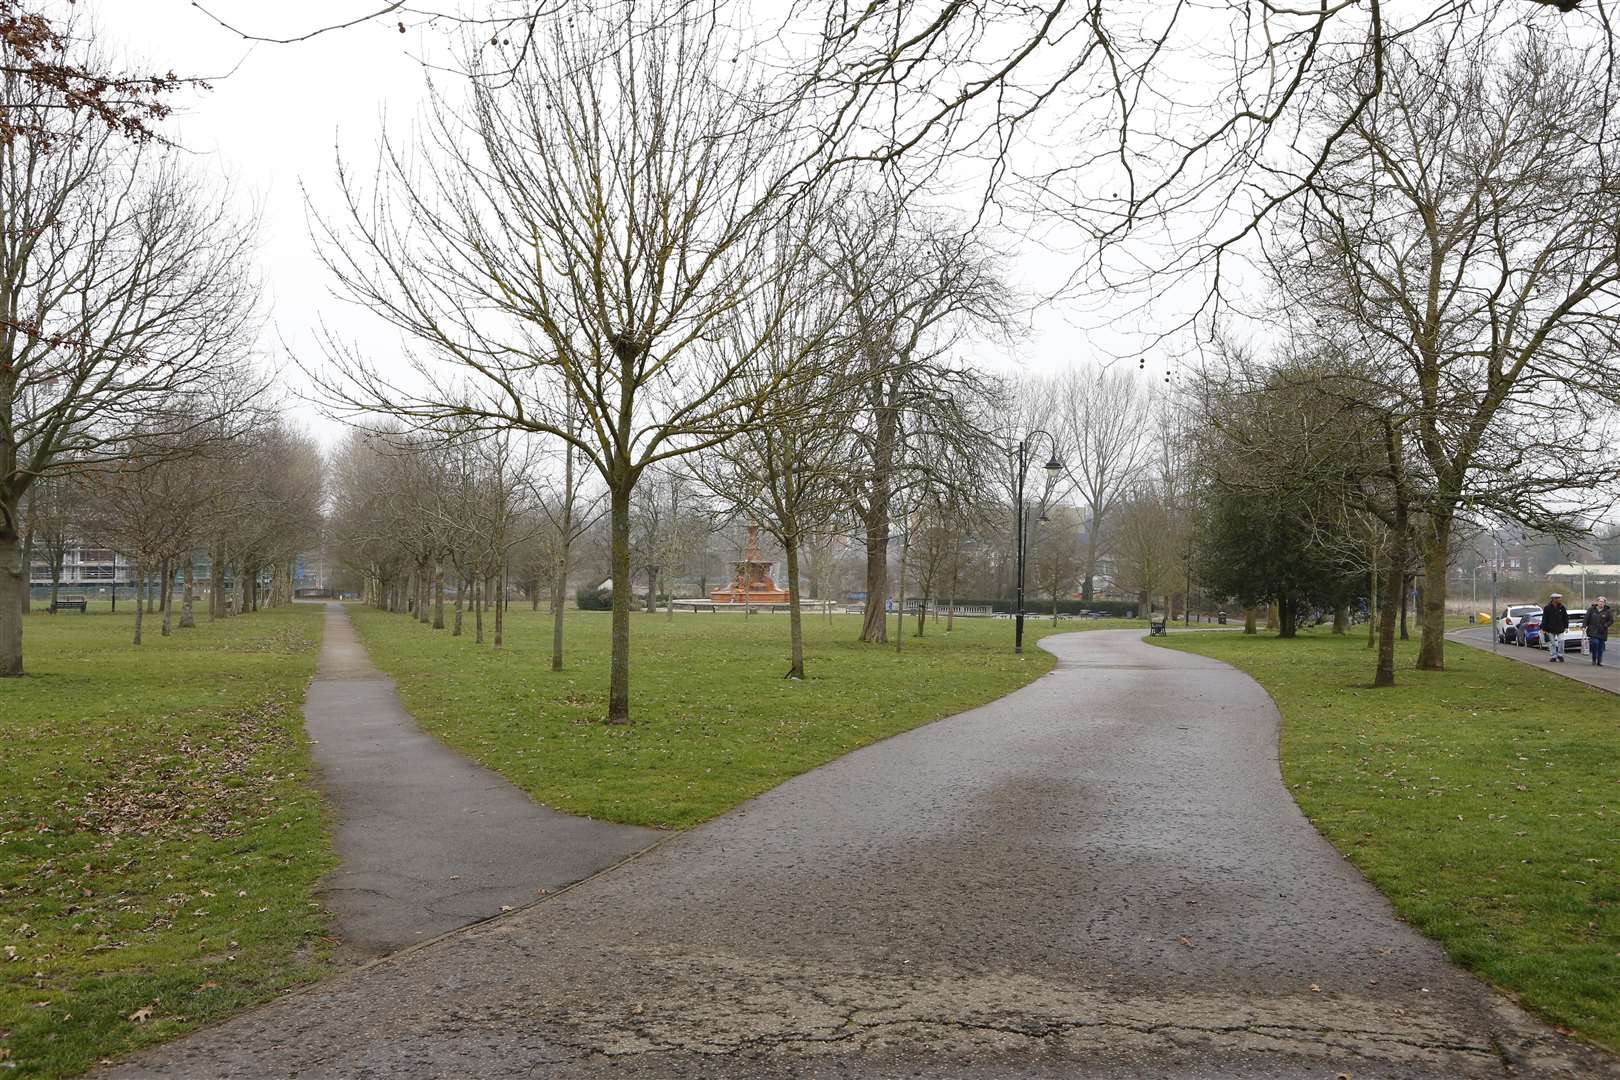 Victoria Park is one of the areas covered by the dispersal order